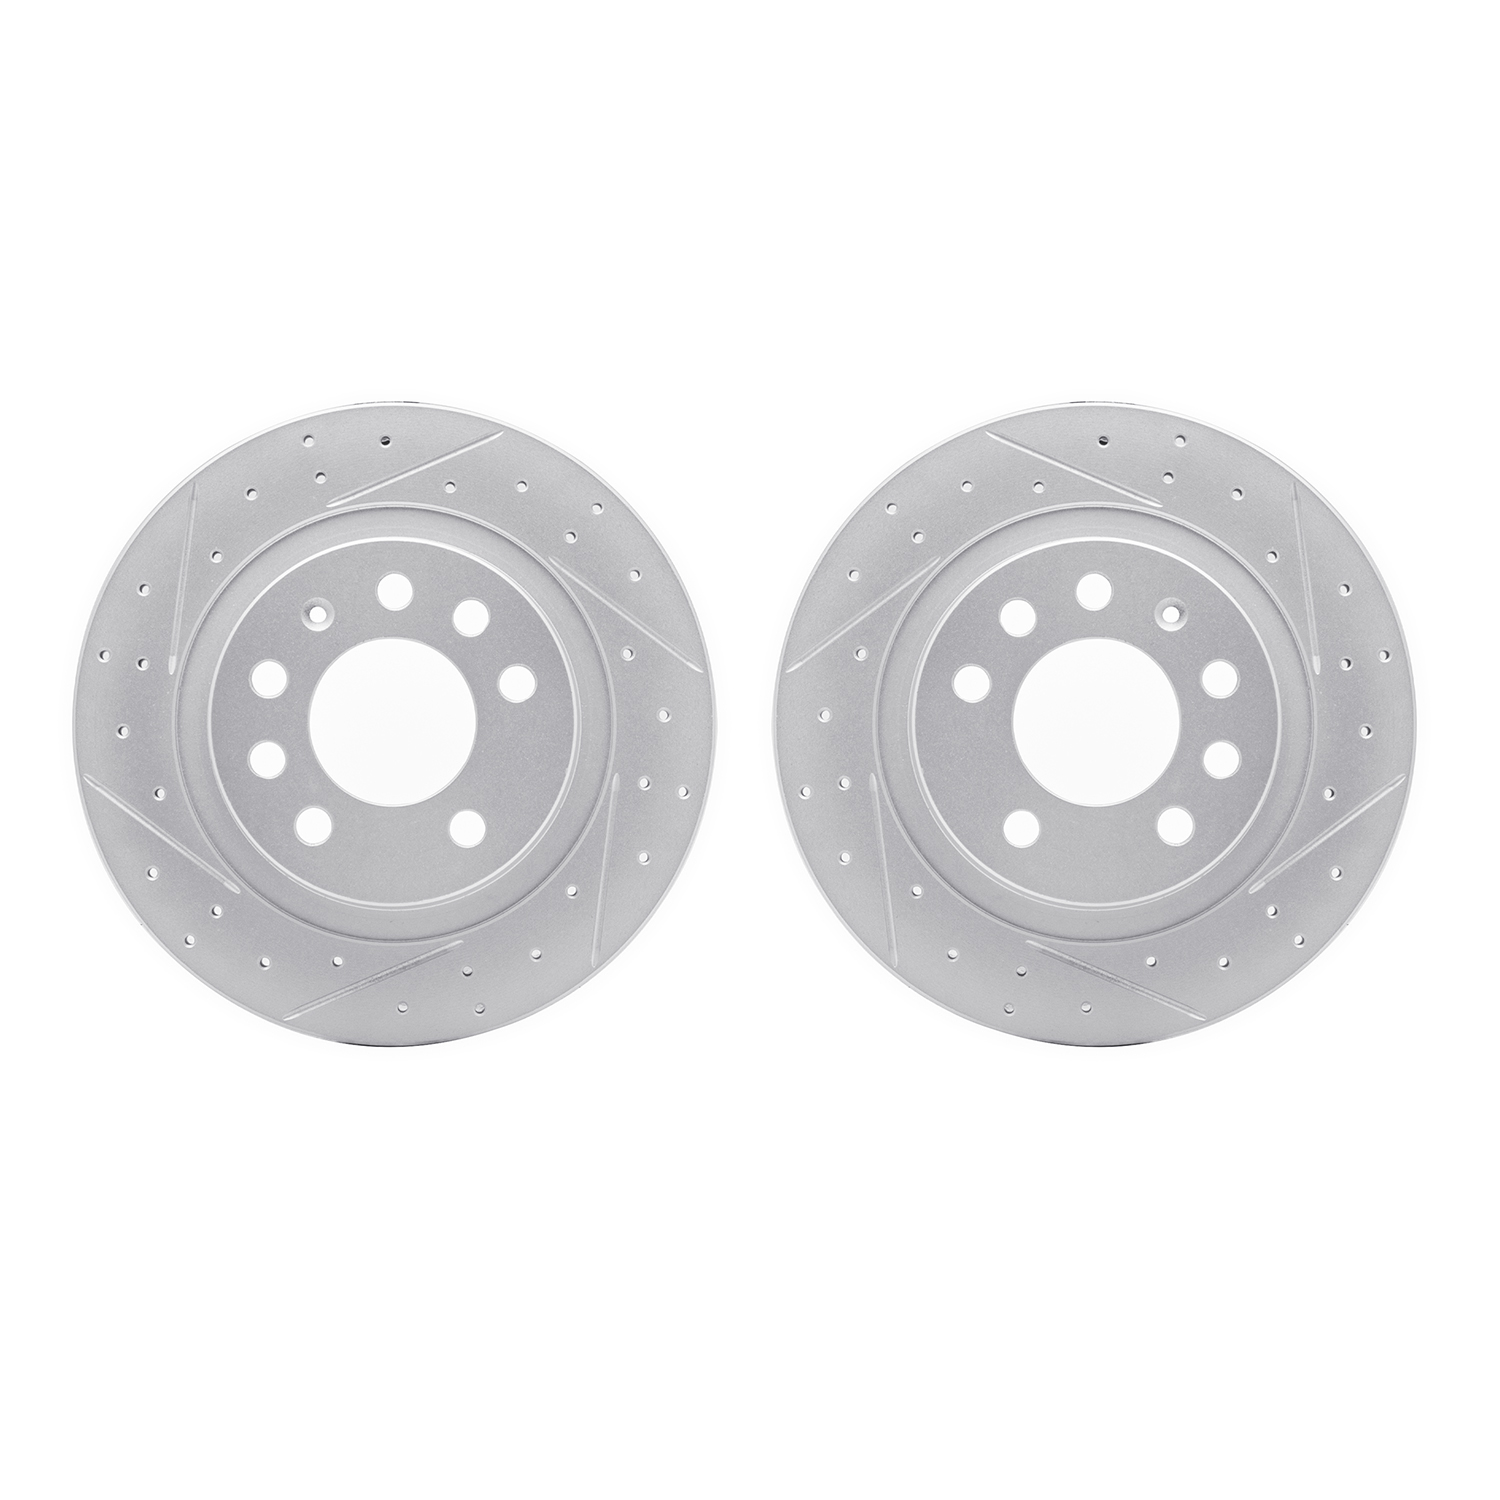 2002-53006 Geoperformance Drilled/Slotted Brake Rotors, 2006-2010 GM, Position: Rear